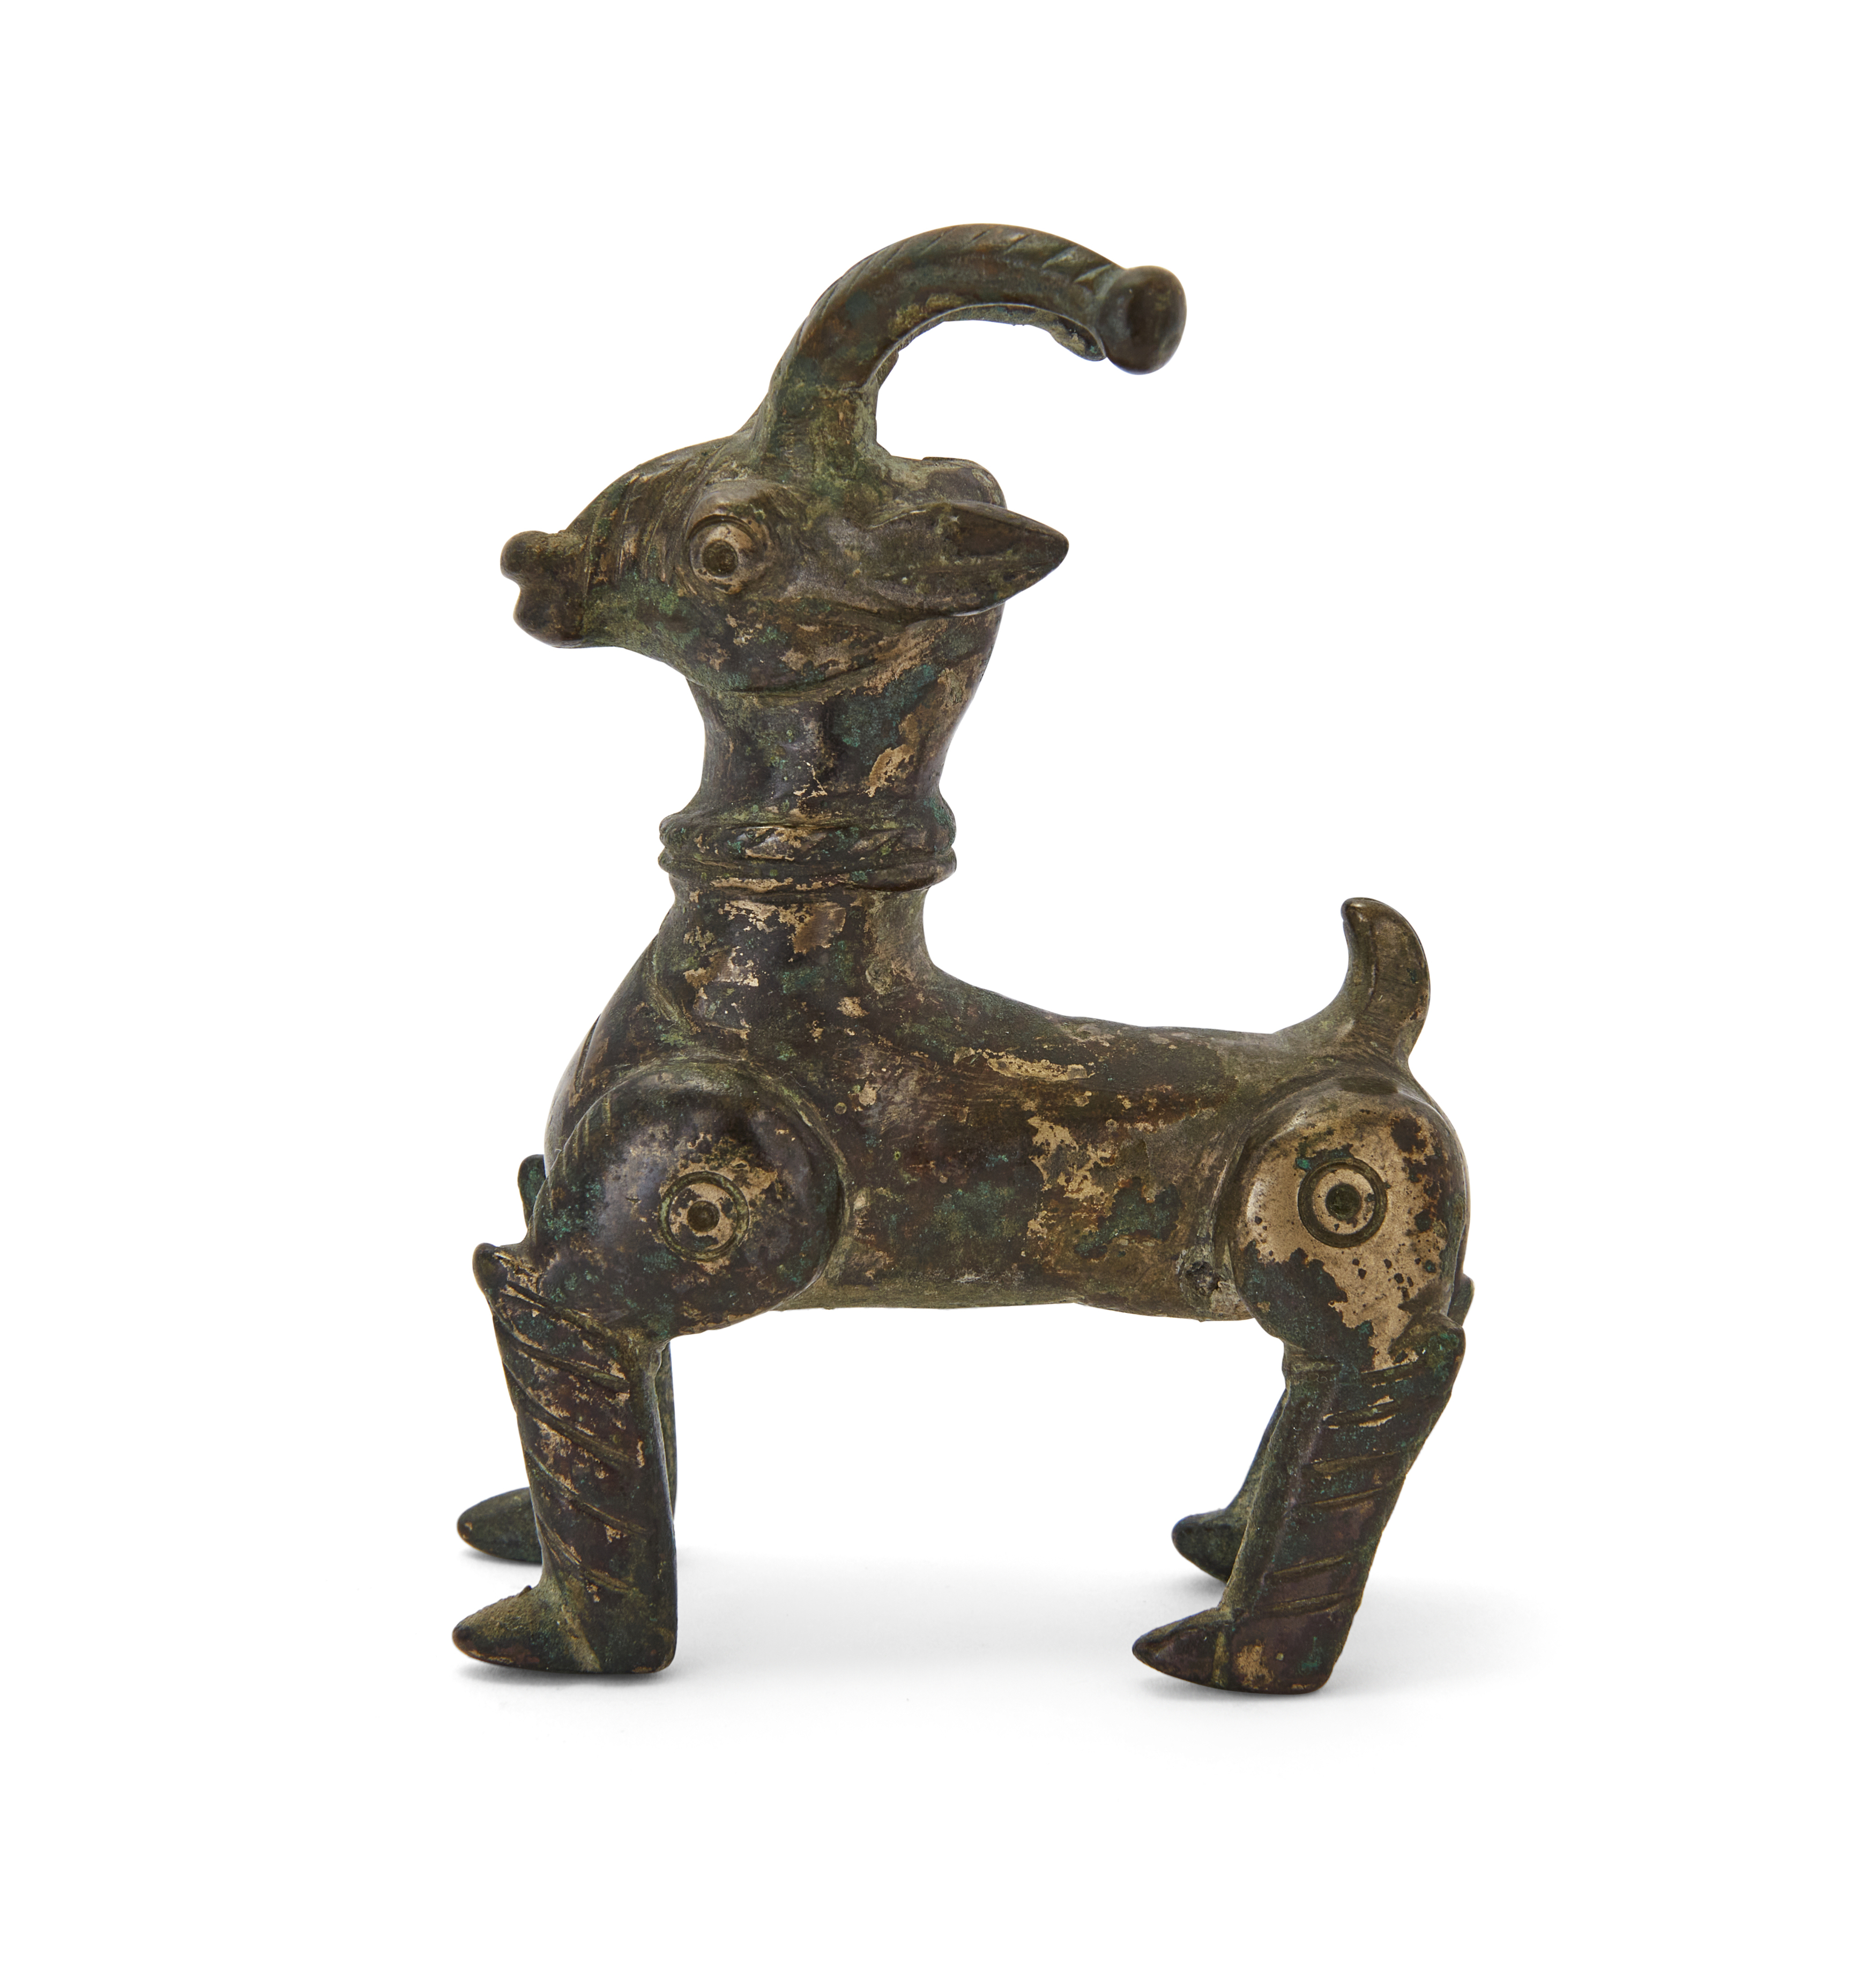 A small copper alloy figure of a deer, Khorasan, northeast Iran, 12th century, Its antlers and ... - Image 2 of 2